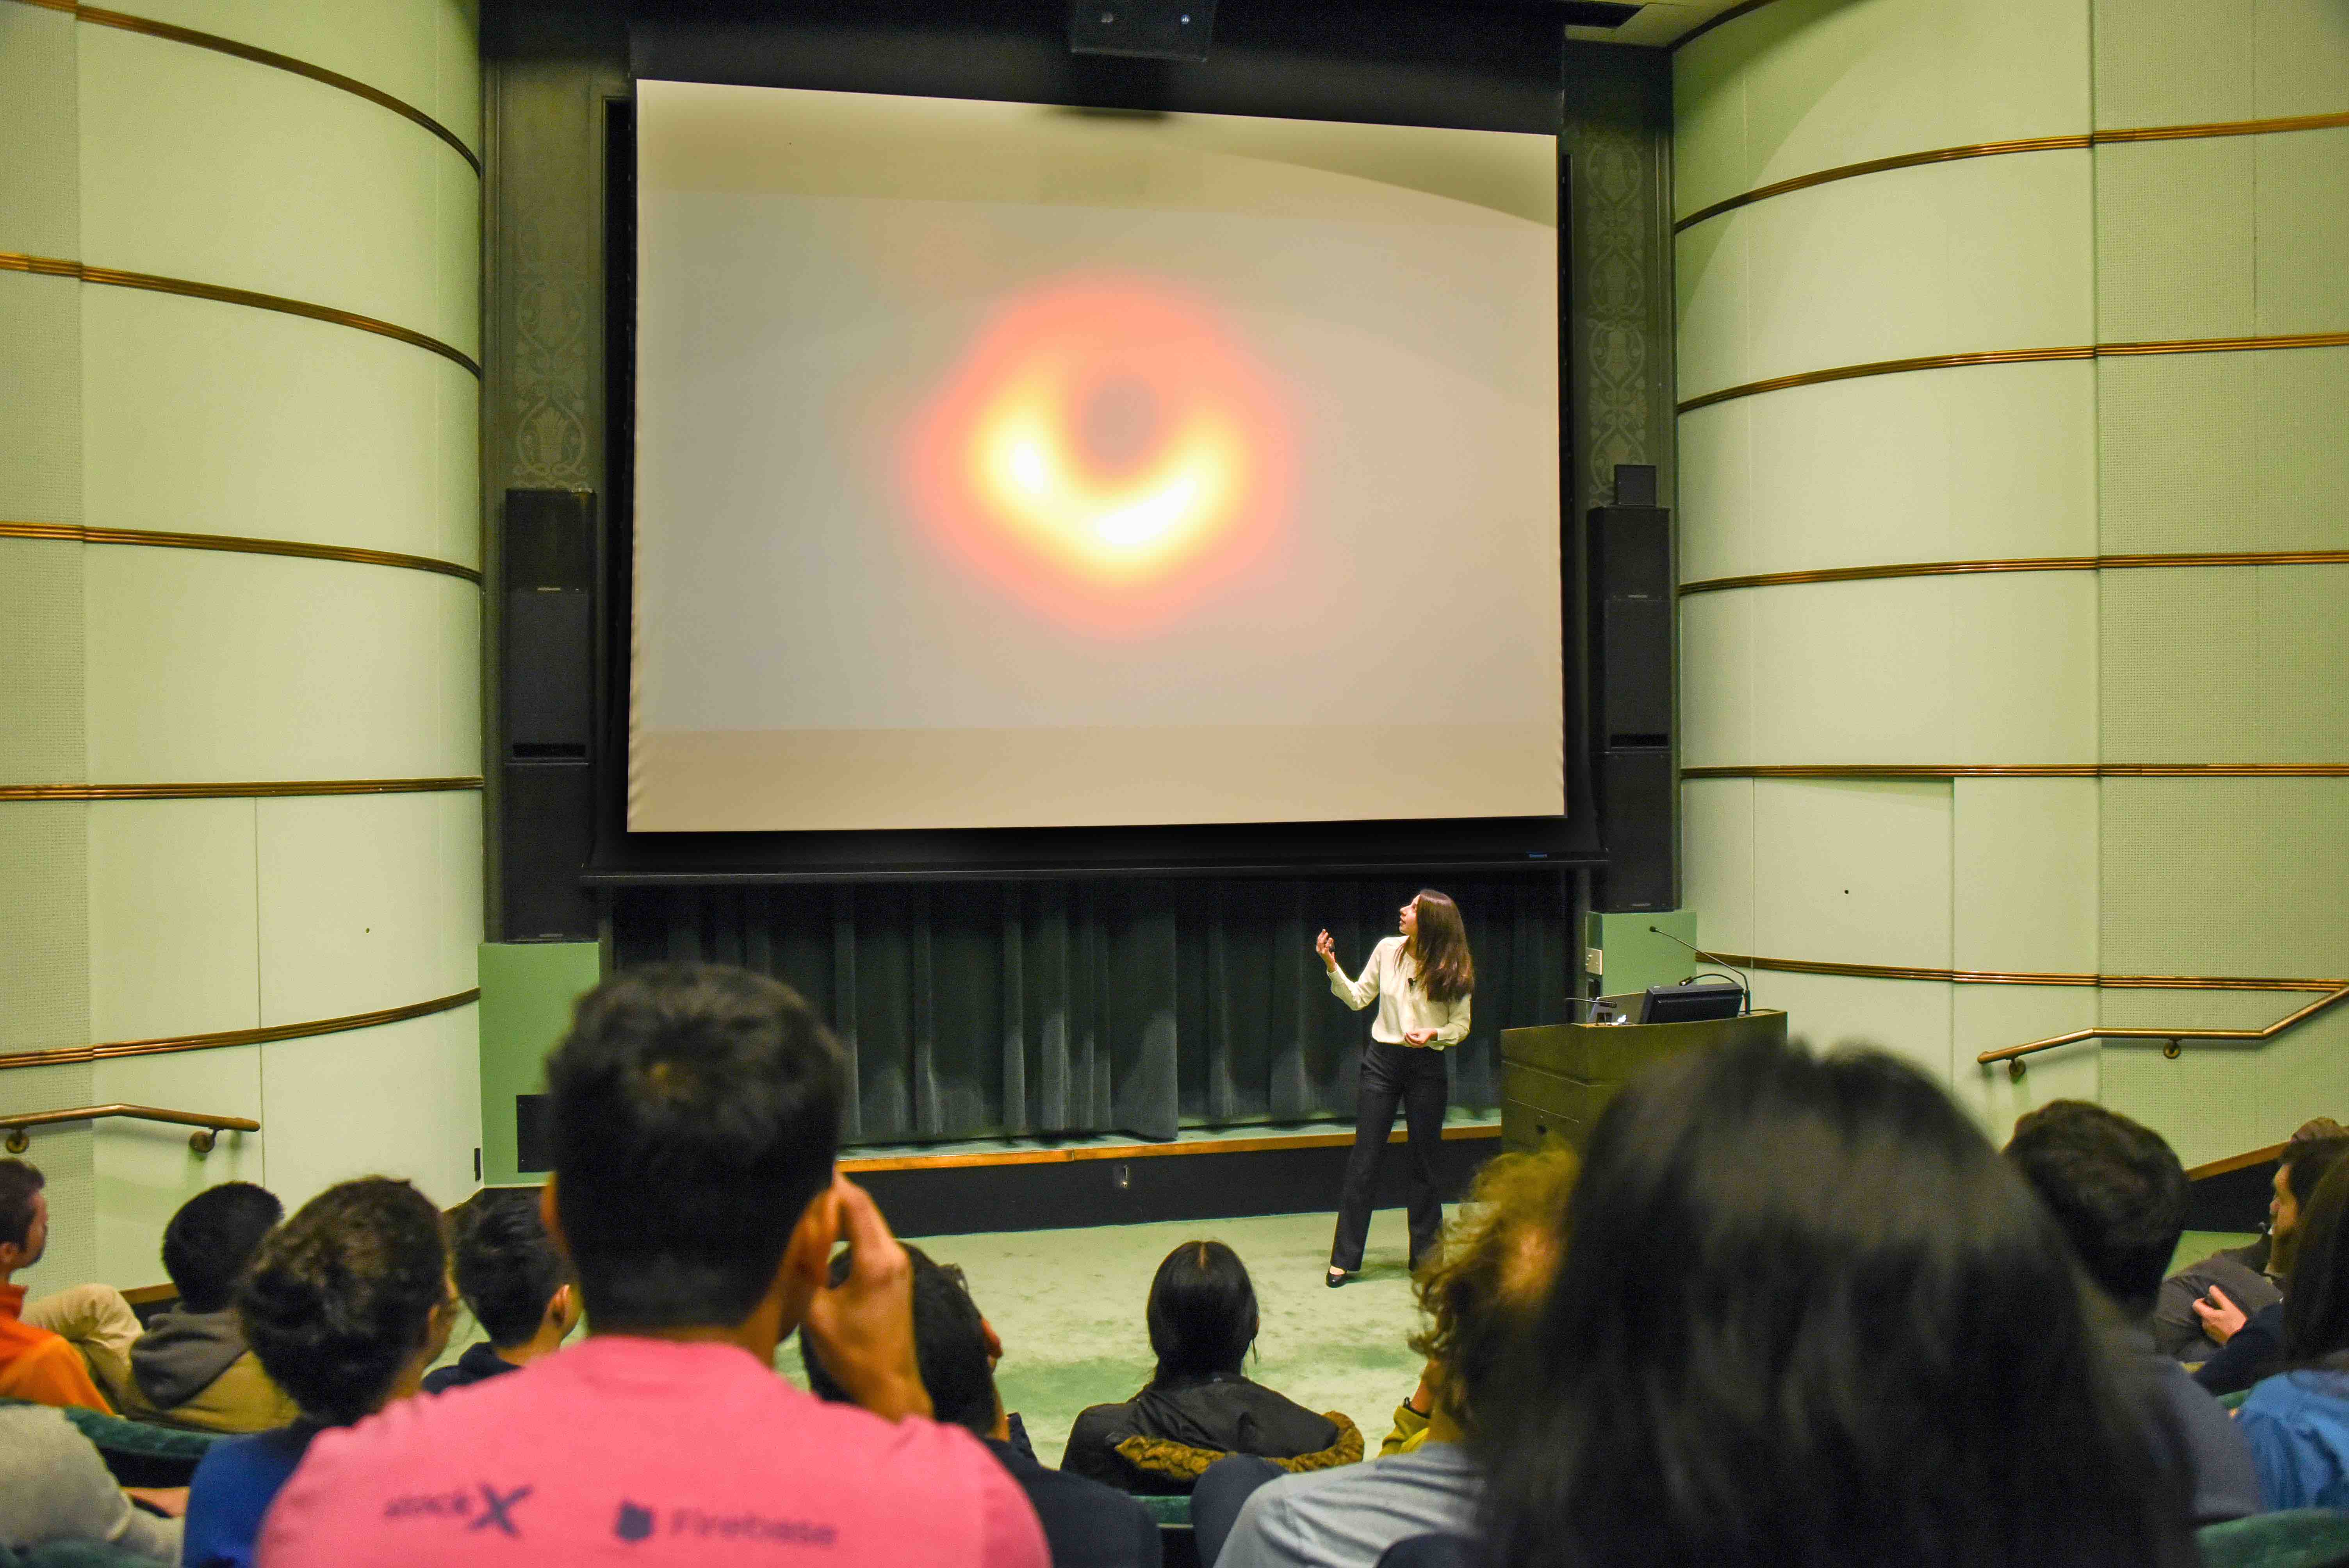 Dr. Bouman shows the first ever image of a black hole - a red/orange ring that's brighter on the bottom than the top